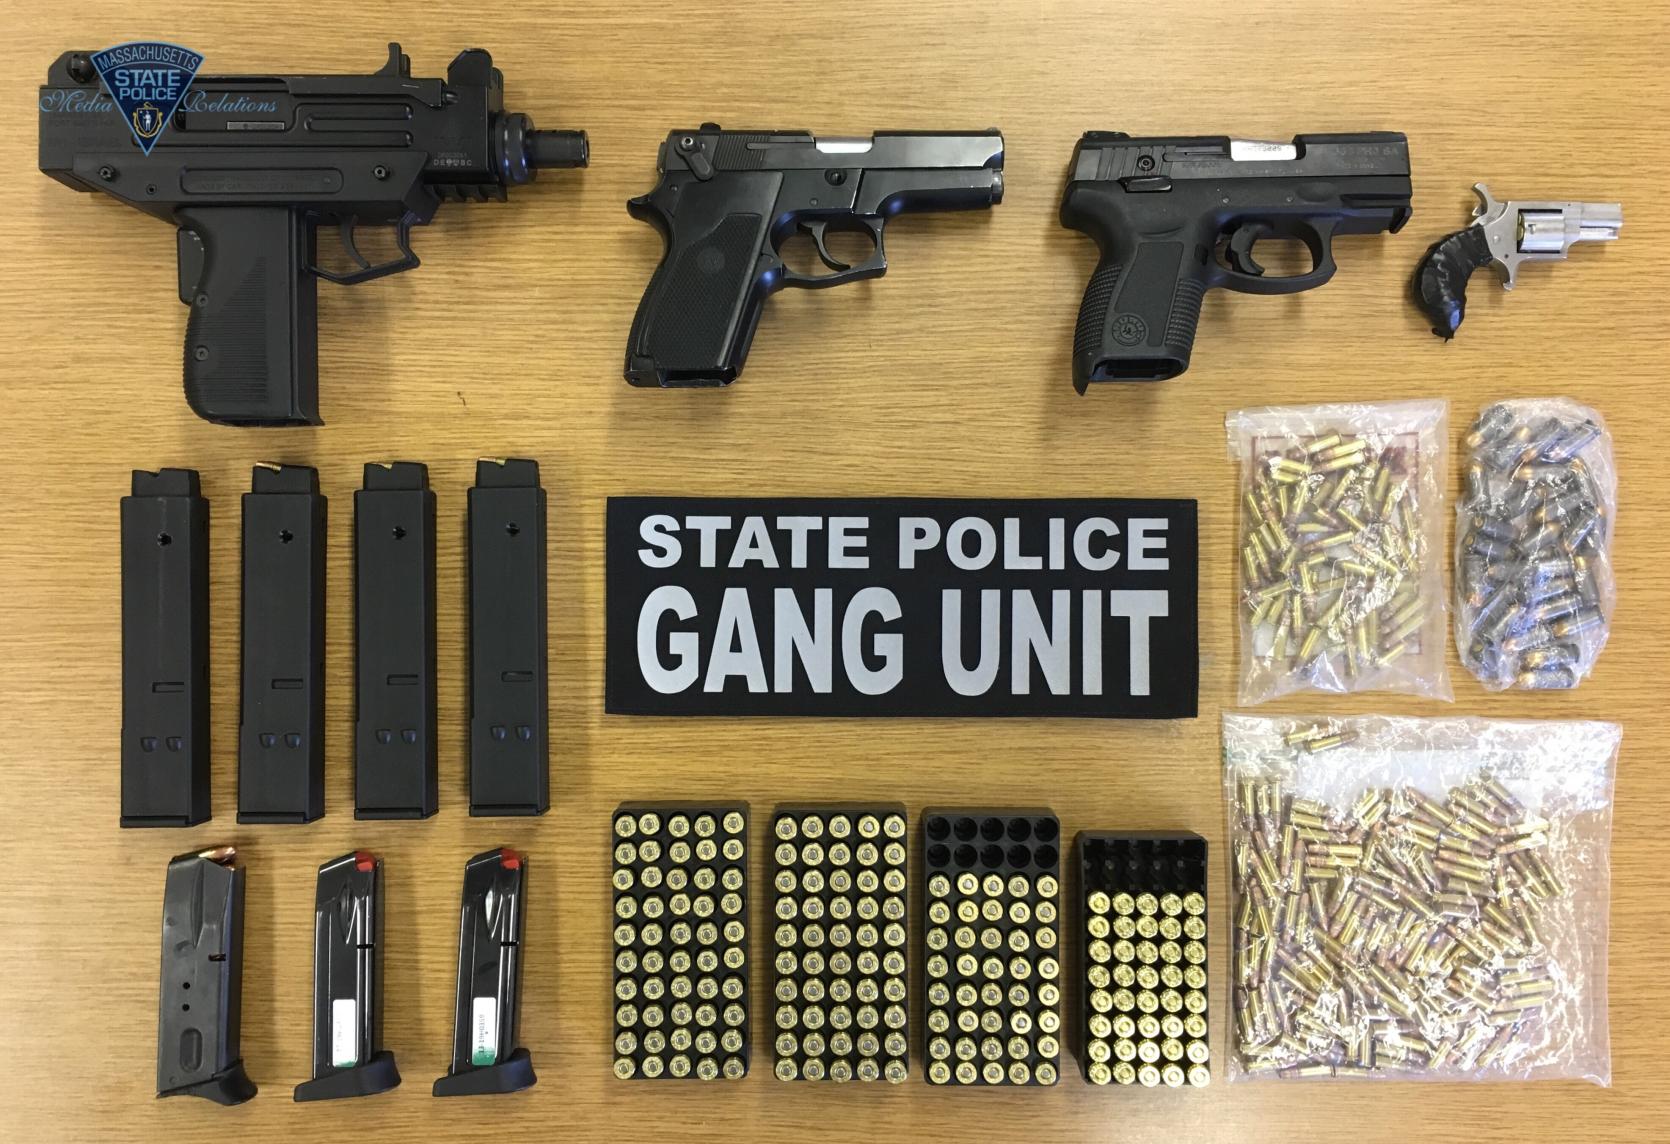 MSP, ATF & Worcester Police Arrest Yields Guns and Ammo